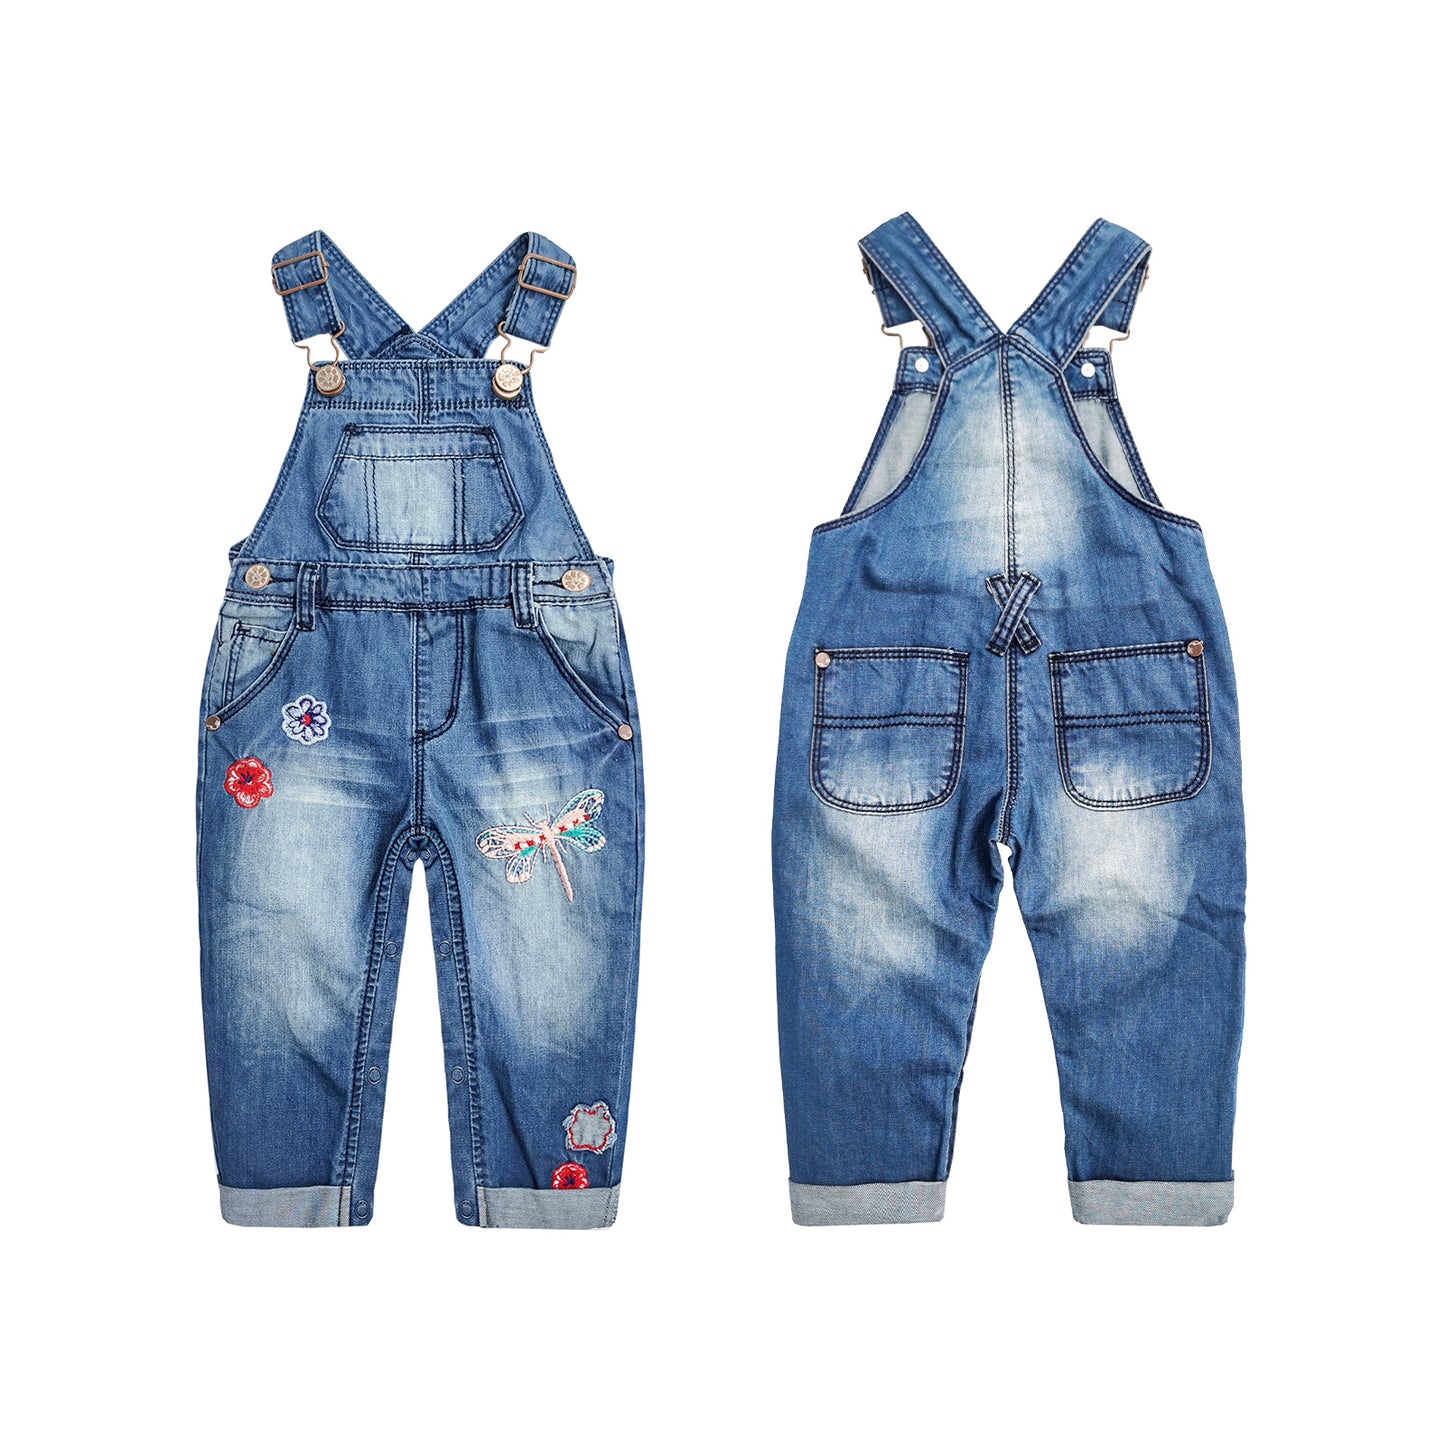 Toddler Embroidery Girls Denim Overalls